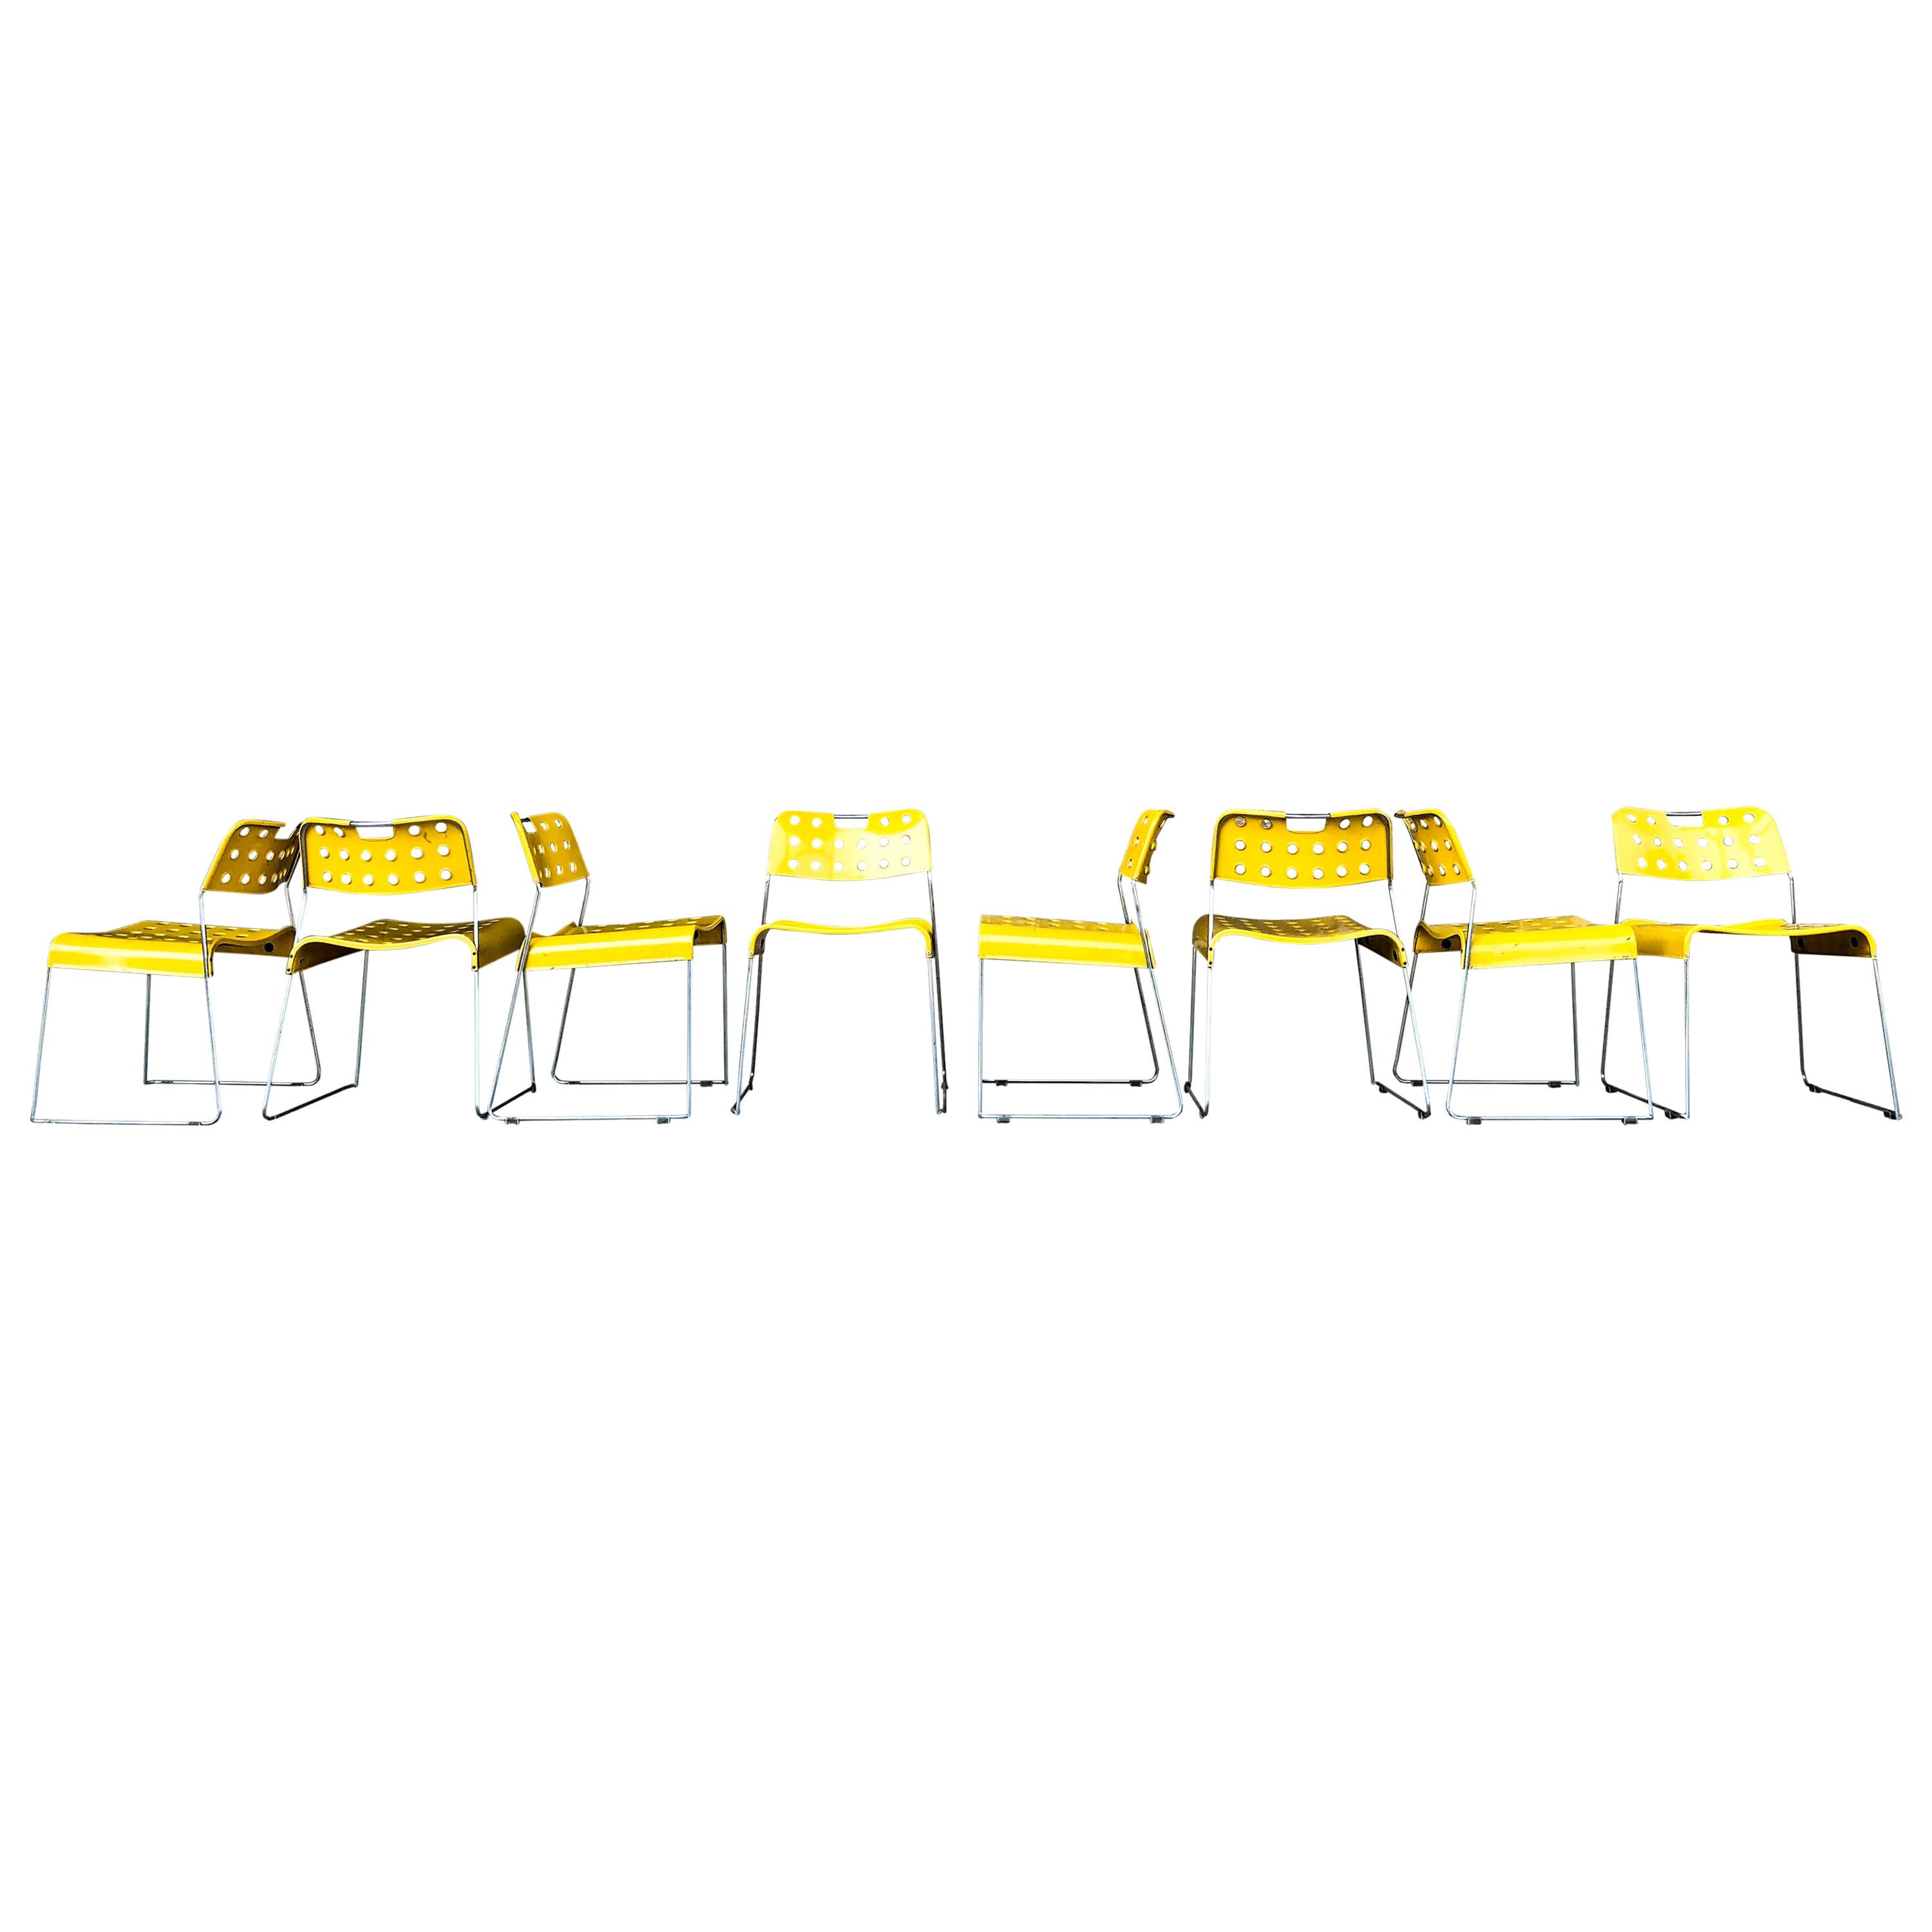 Steel Rodney Kinsman Space Age Yellow Omstak Chair for Bieffeplast, 1971, Set of 4 For Sale